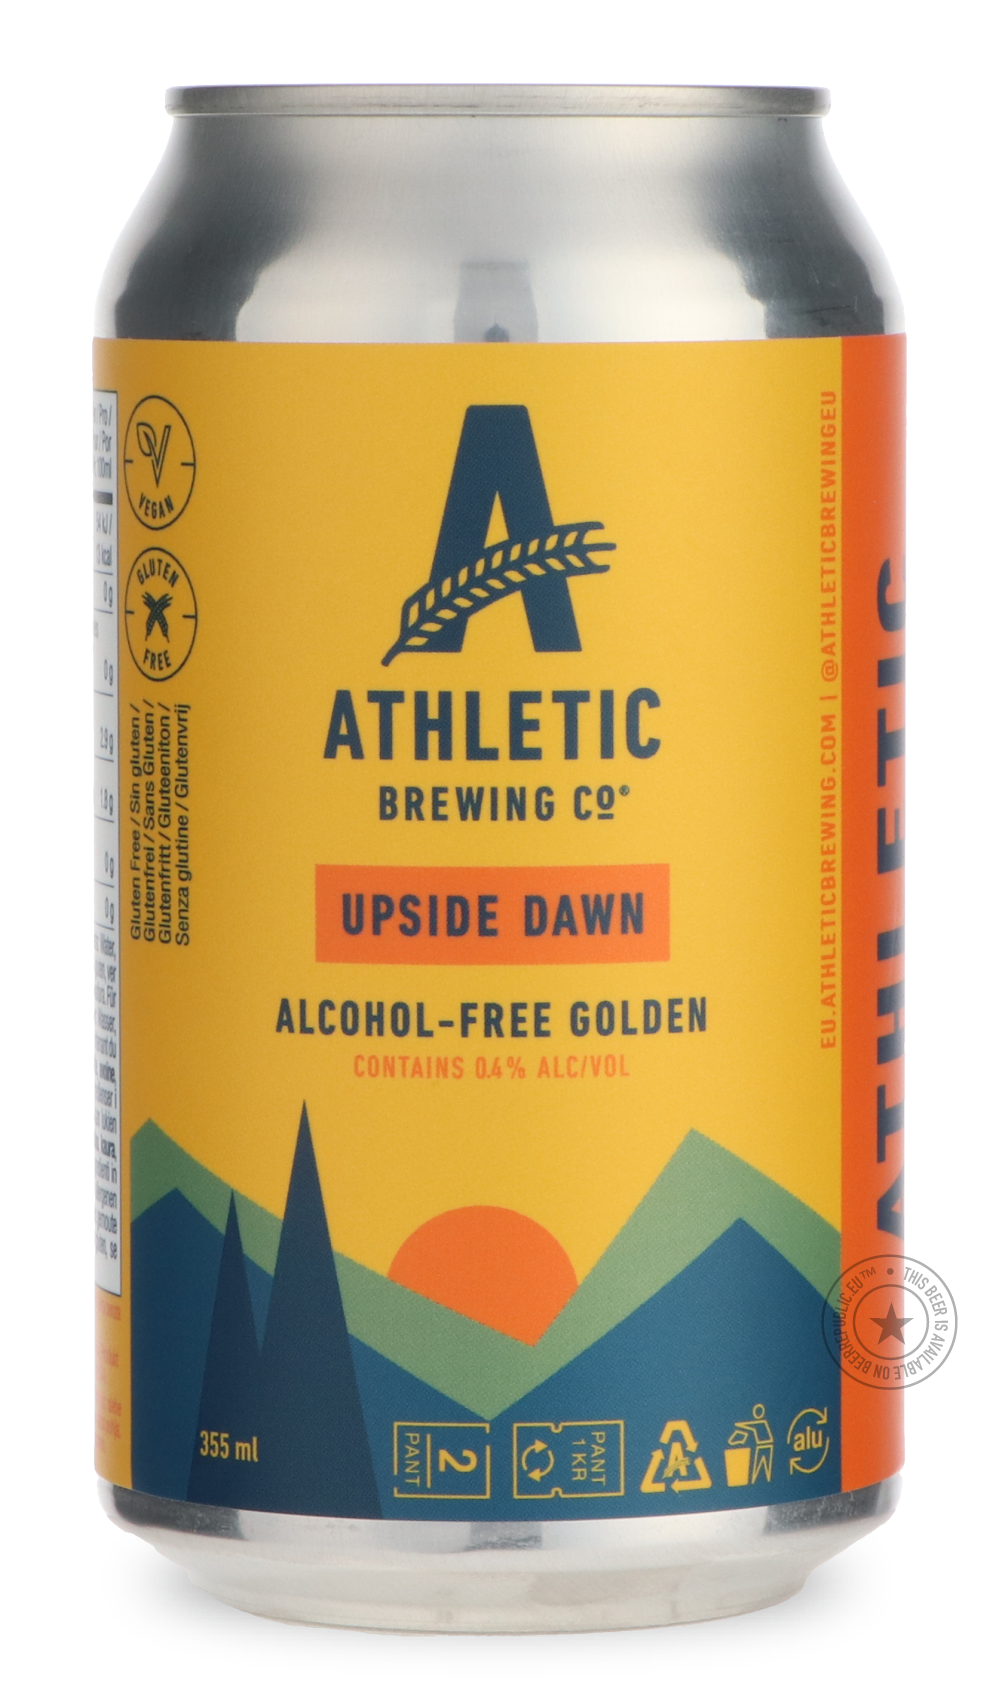 -Athletic- Upside Dawn Golden-Specials- Only @ Beer Republic - The best online beer store for American & Canadian craft beer - Buy beer online from the USA and Canada - Bier online kopen - Amerikaans bier kopen - Craft beer store - Craft beer kopen - Amerikanisch bier kaufen - Bier online kaufen - Acheter biere online - IPA - Stout - Porter - New England IPA - Hazy IPA - Imperial Stout - Barrel Aged - Barrel Aged Imperial Stout - Brown - Dark beer - Blond - Blonde - Pilsner - Lager - Wheat - Weizen - Amber 